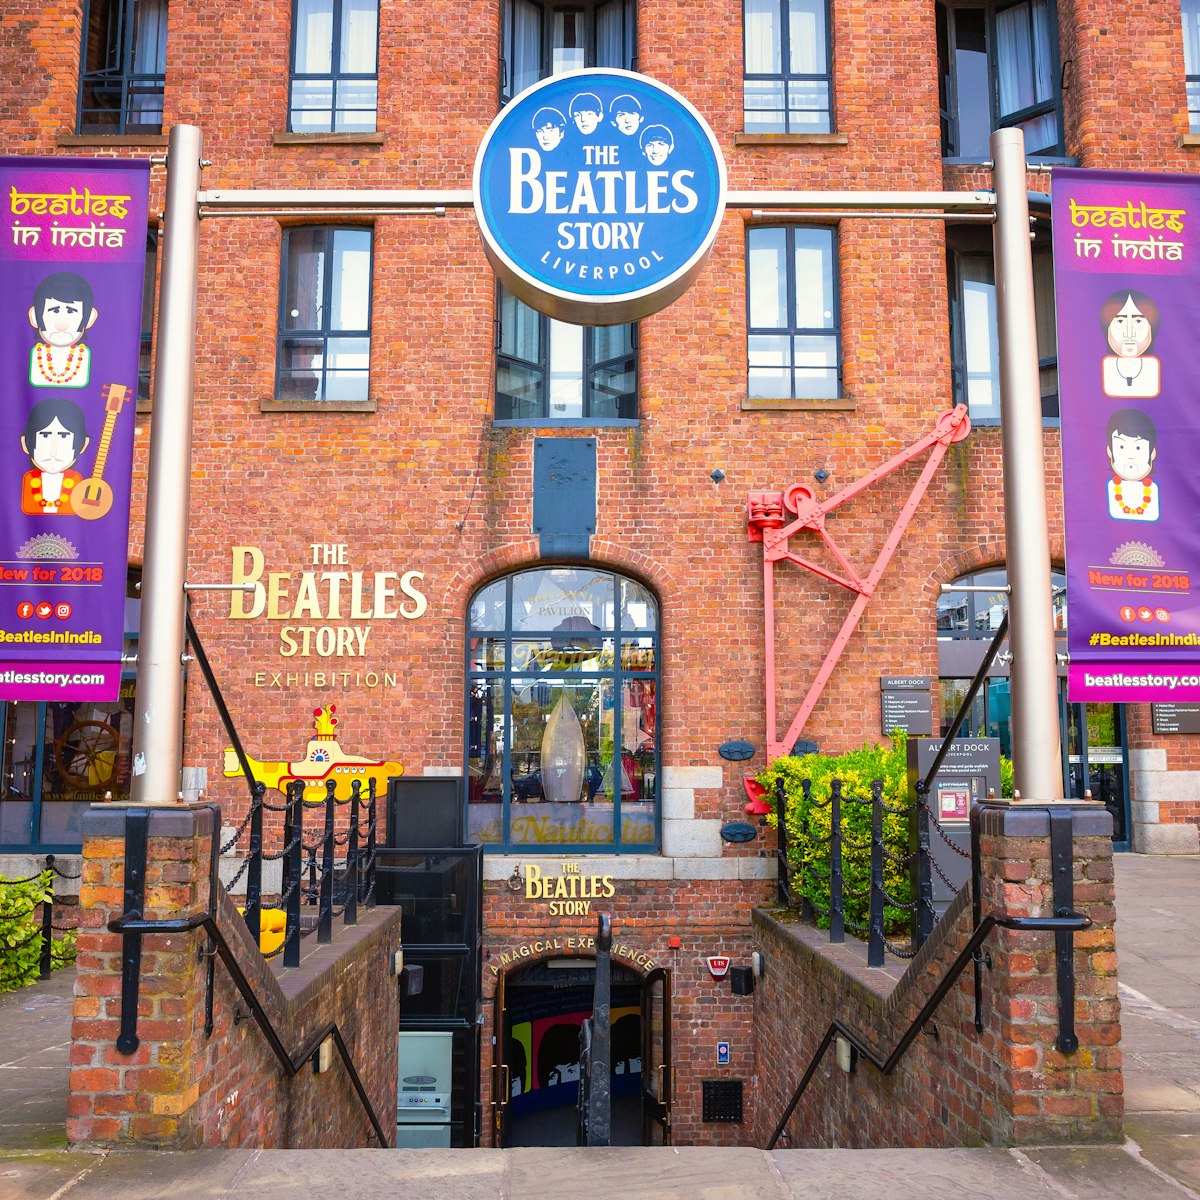 Liverpool, UK - May 17 2018: The Beatles Story located on the historical Albert Dock, opened on 1 May 1990. The museum was also recognised as one of the best tourist attractions of the United Kingdom
1425908642
architecture, beatles, blackbird, britain, british, building, cavern, cavern club, city, england, english, europe, european, exhibition, gb, george harrison, great britain, hey jude, imagine, john lennon, landmark, let it be, liverpool, mathew, mersey, merseyside, museum, music, obladi oblada, paul mccartney, penny lane, pop, ringo starr, river mersey, song, statue, the beatles, the beatles story, tourism, travel, uk, united kingdom, yesterday, yoko ono